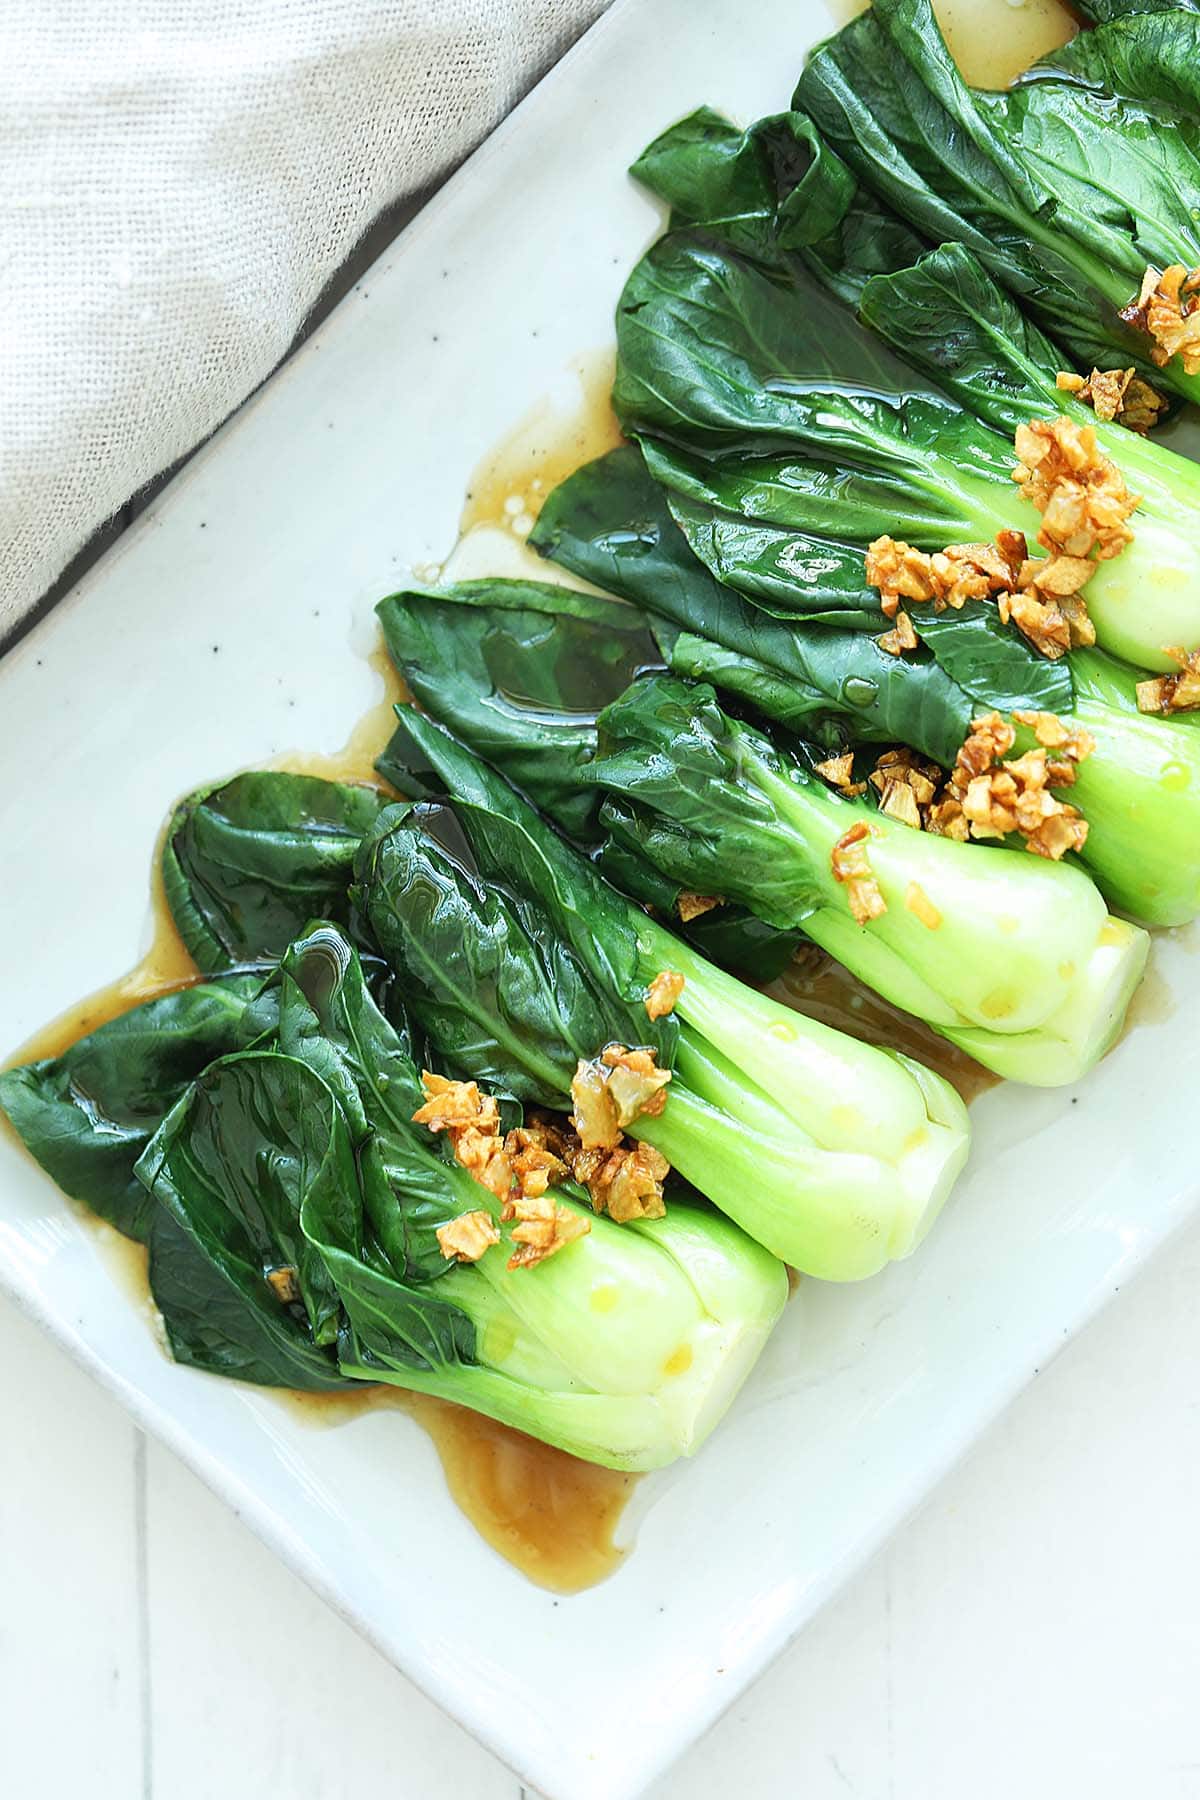 Baby bok choy is one of the most popular type of Chinese greens vegetables cooked with oyster sauce.